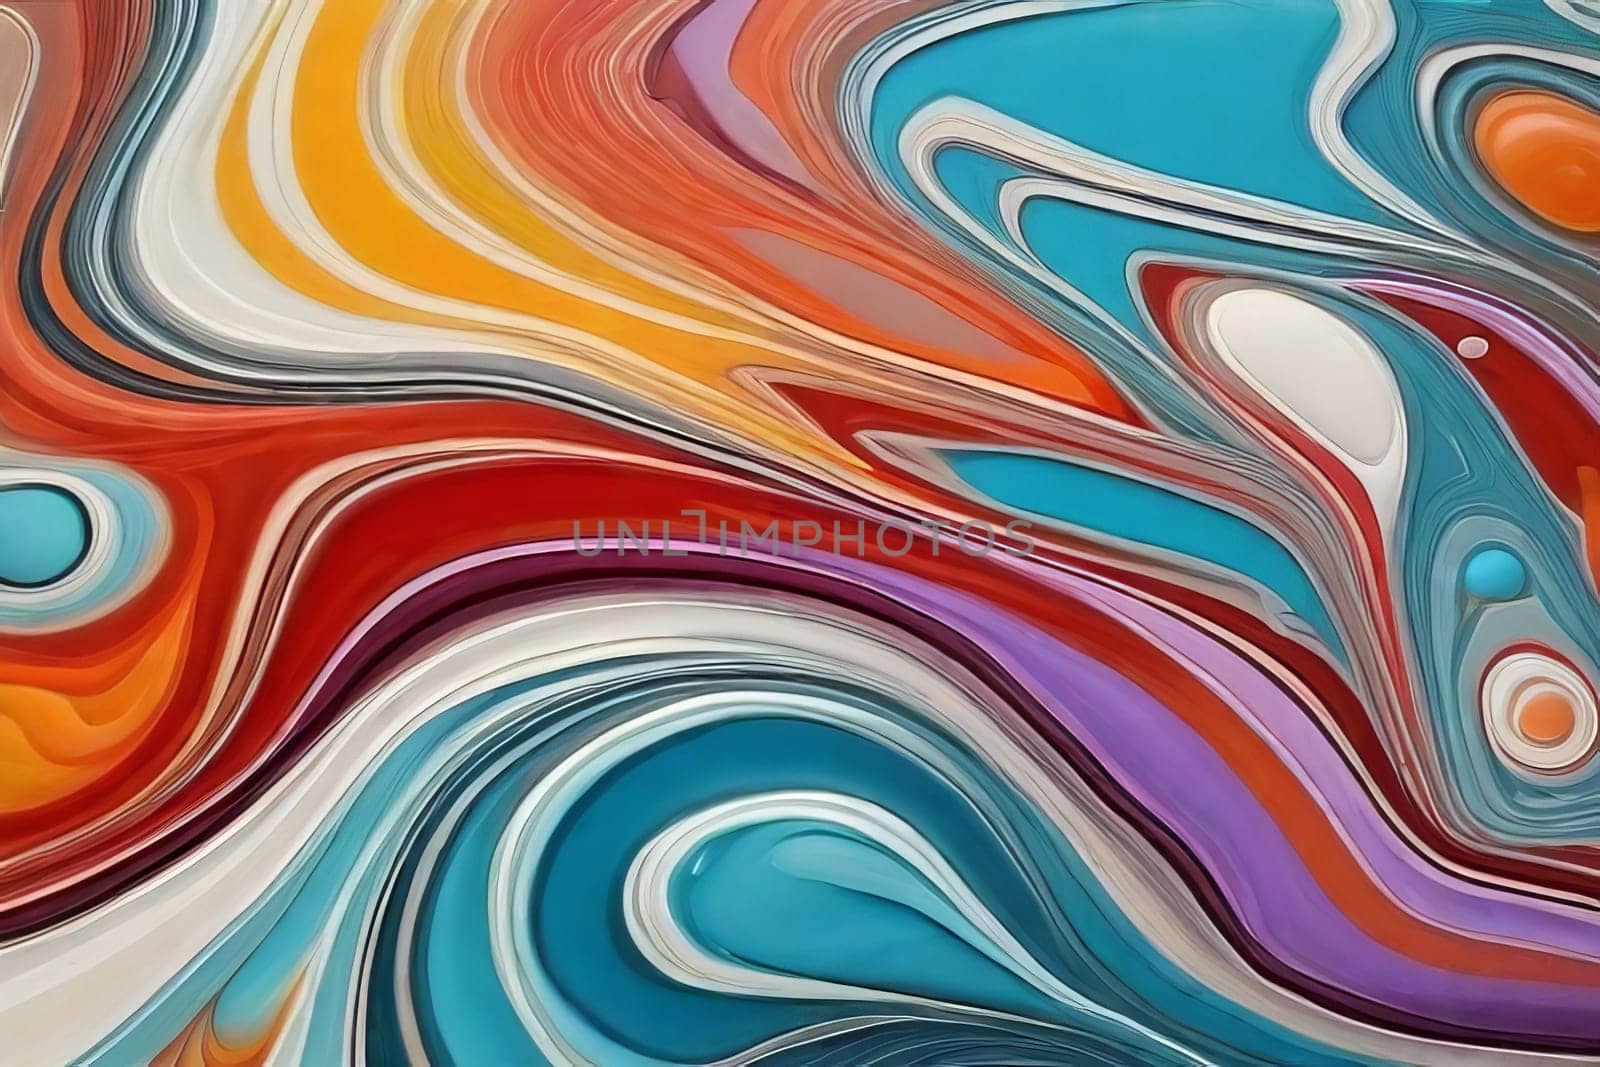 Exquisite Acrylic Flow Artwork: Mesmerizing Abstract Banner Design.